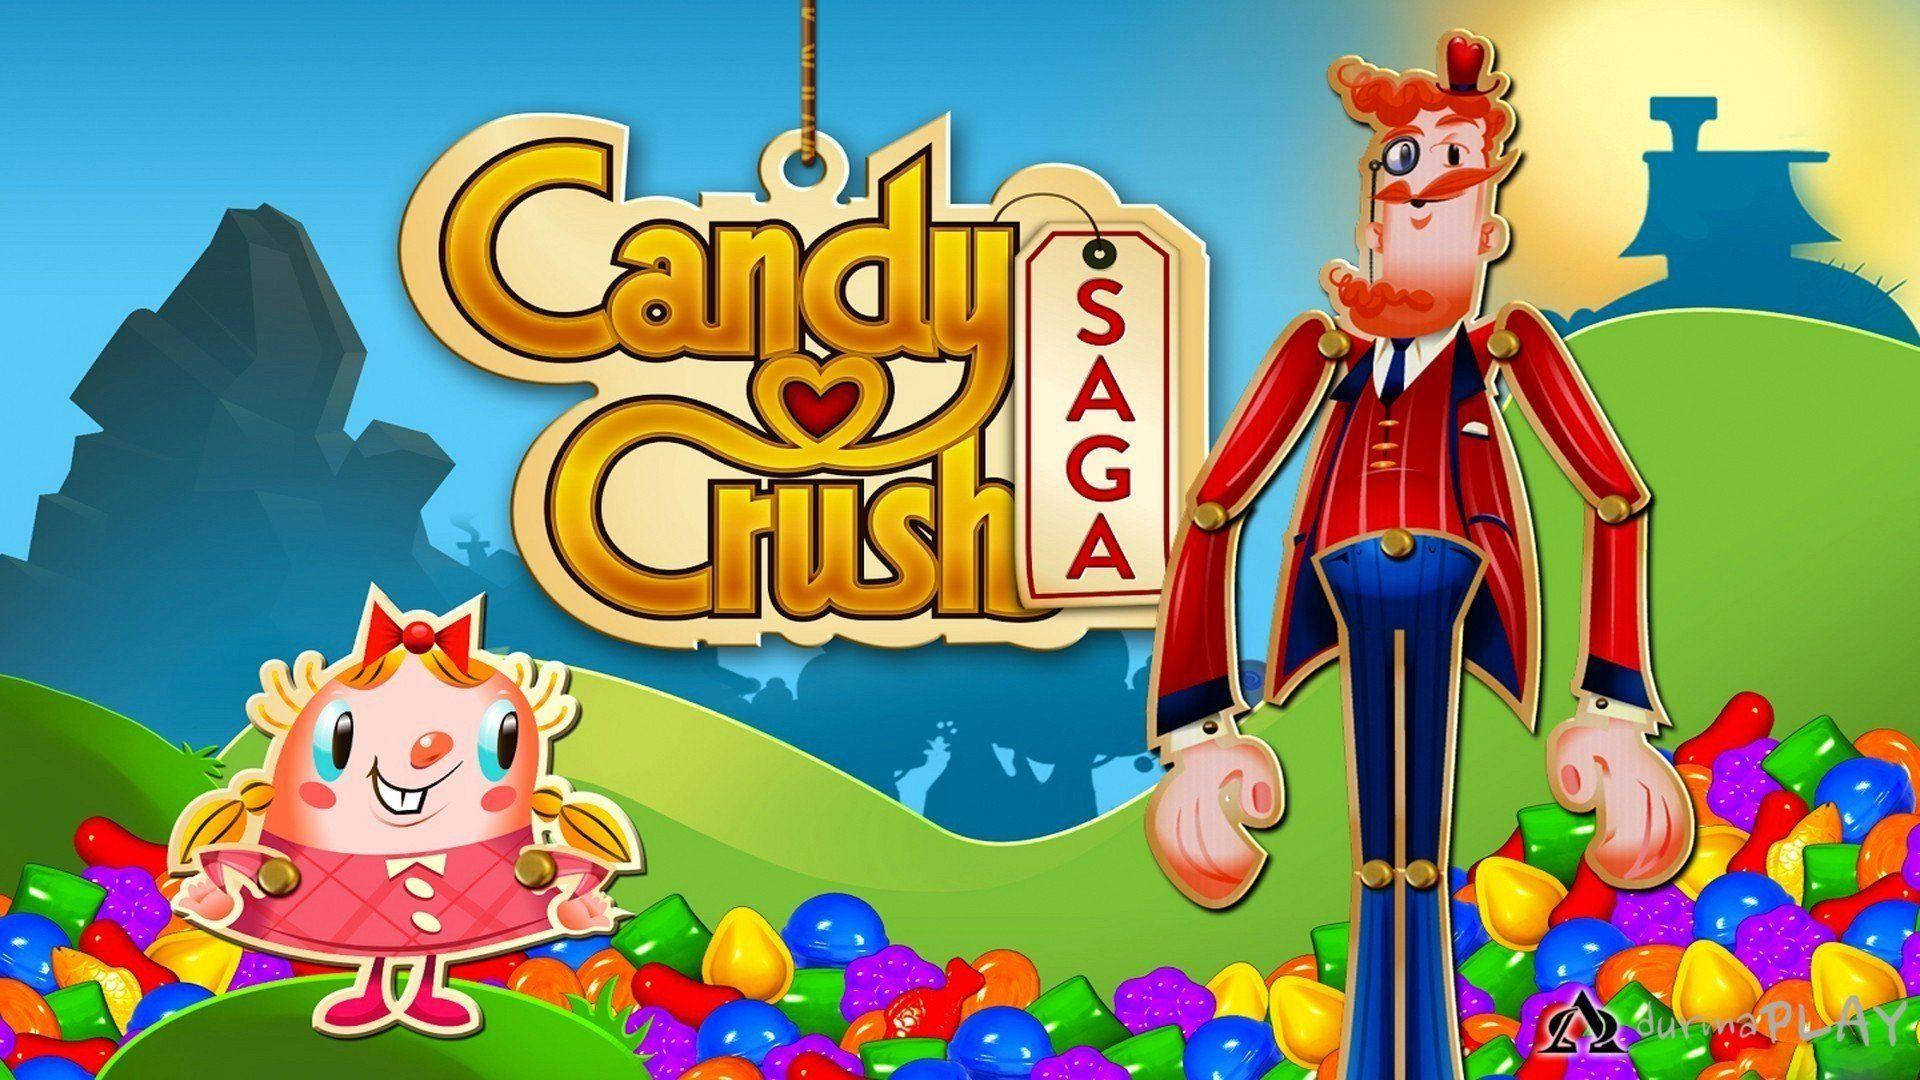 Tiffi amidst the Colorful Candies in Candy Crush Saga Wallpaper